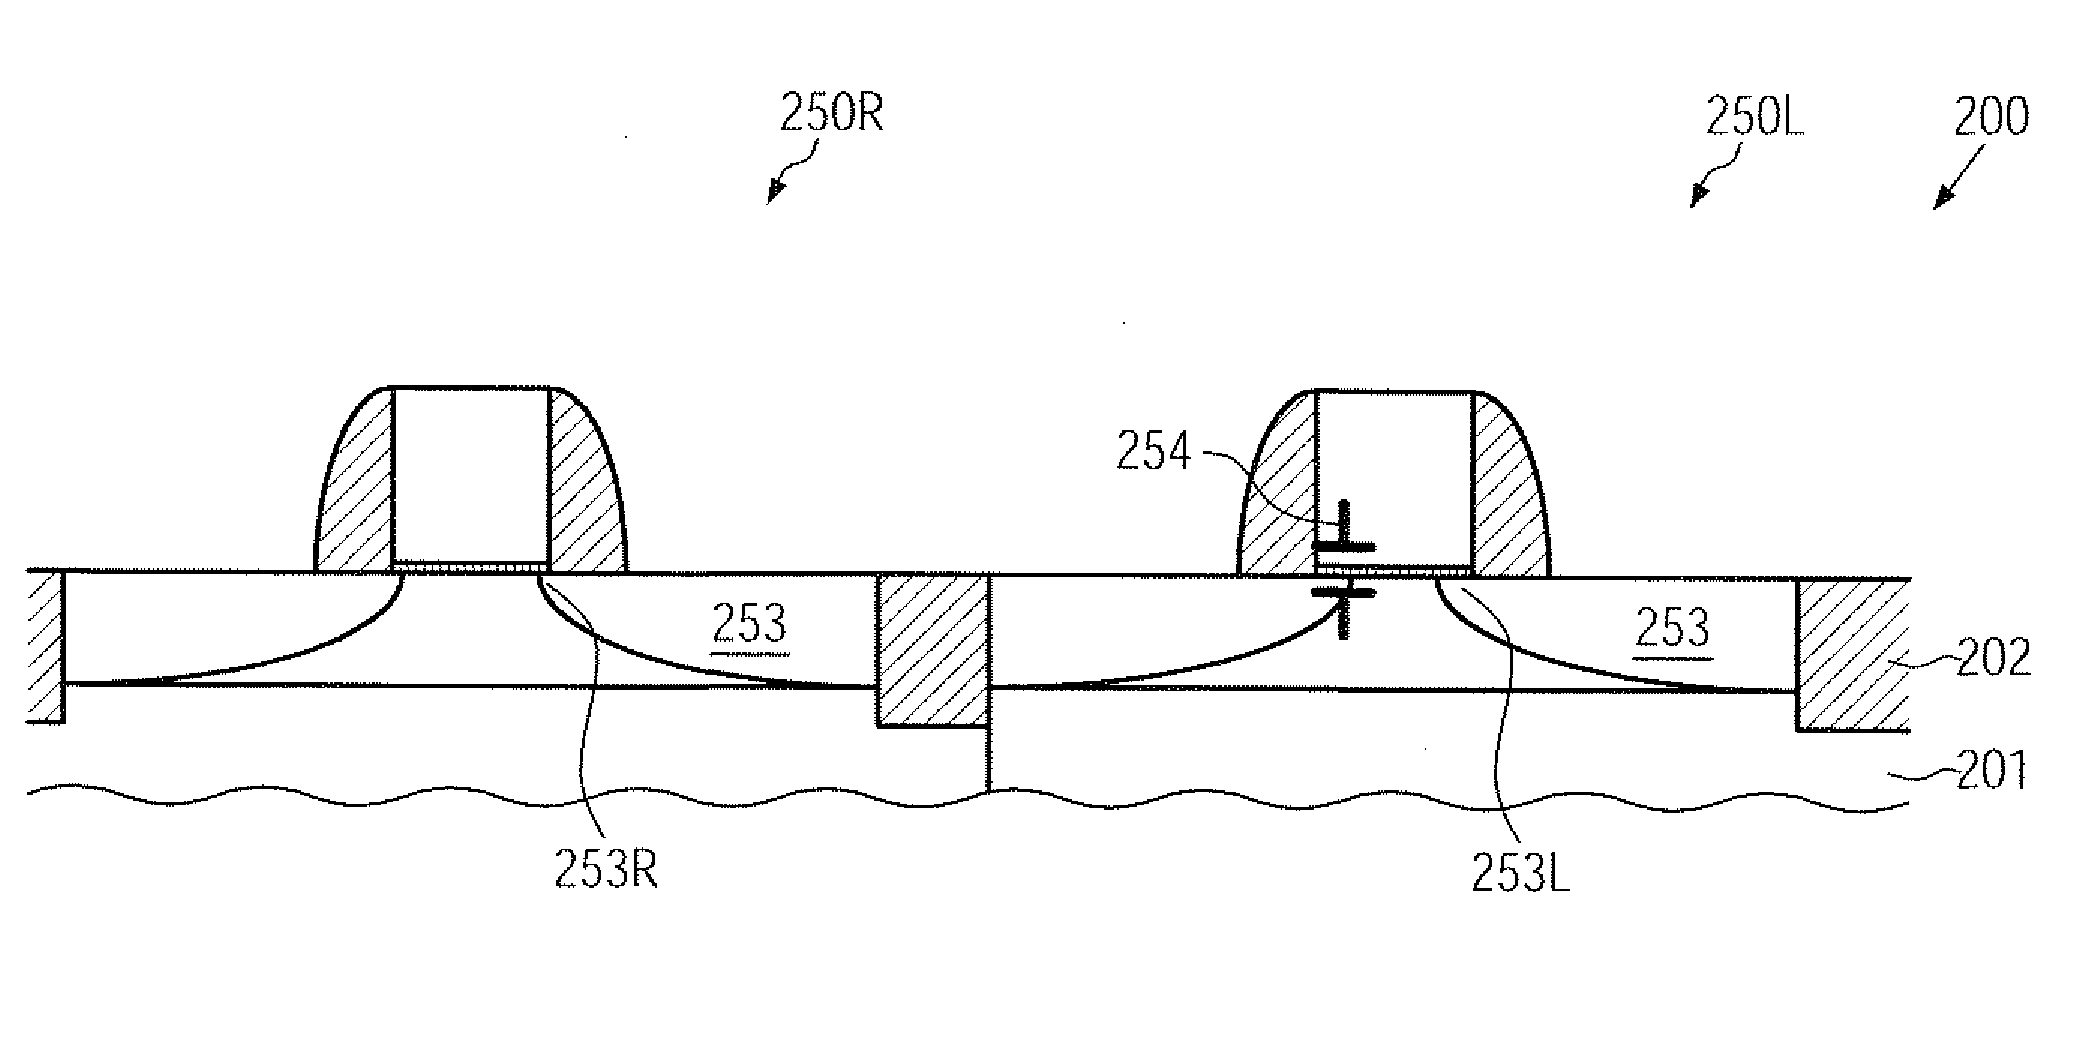 Threshold adjustment for MOS devices by adapting a spacer width prior to implantation